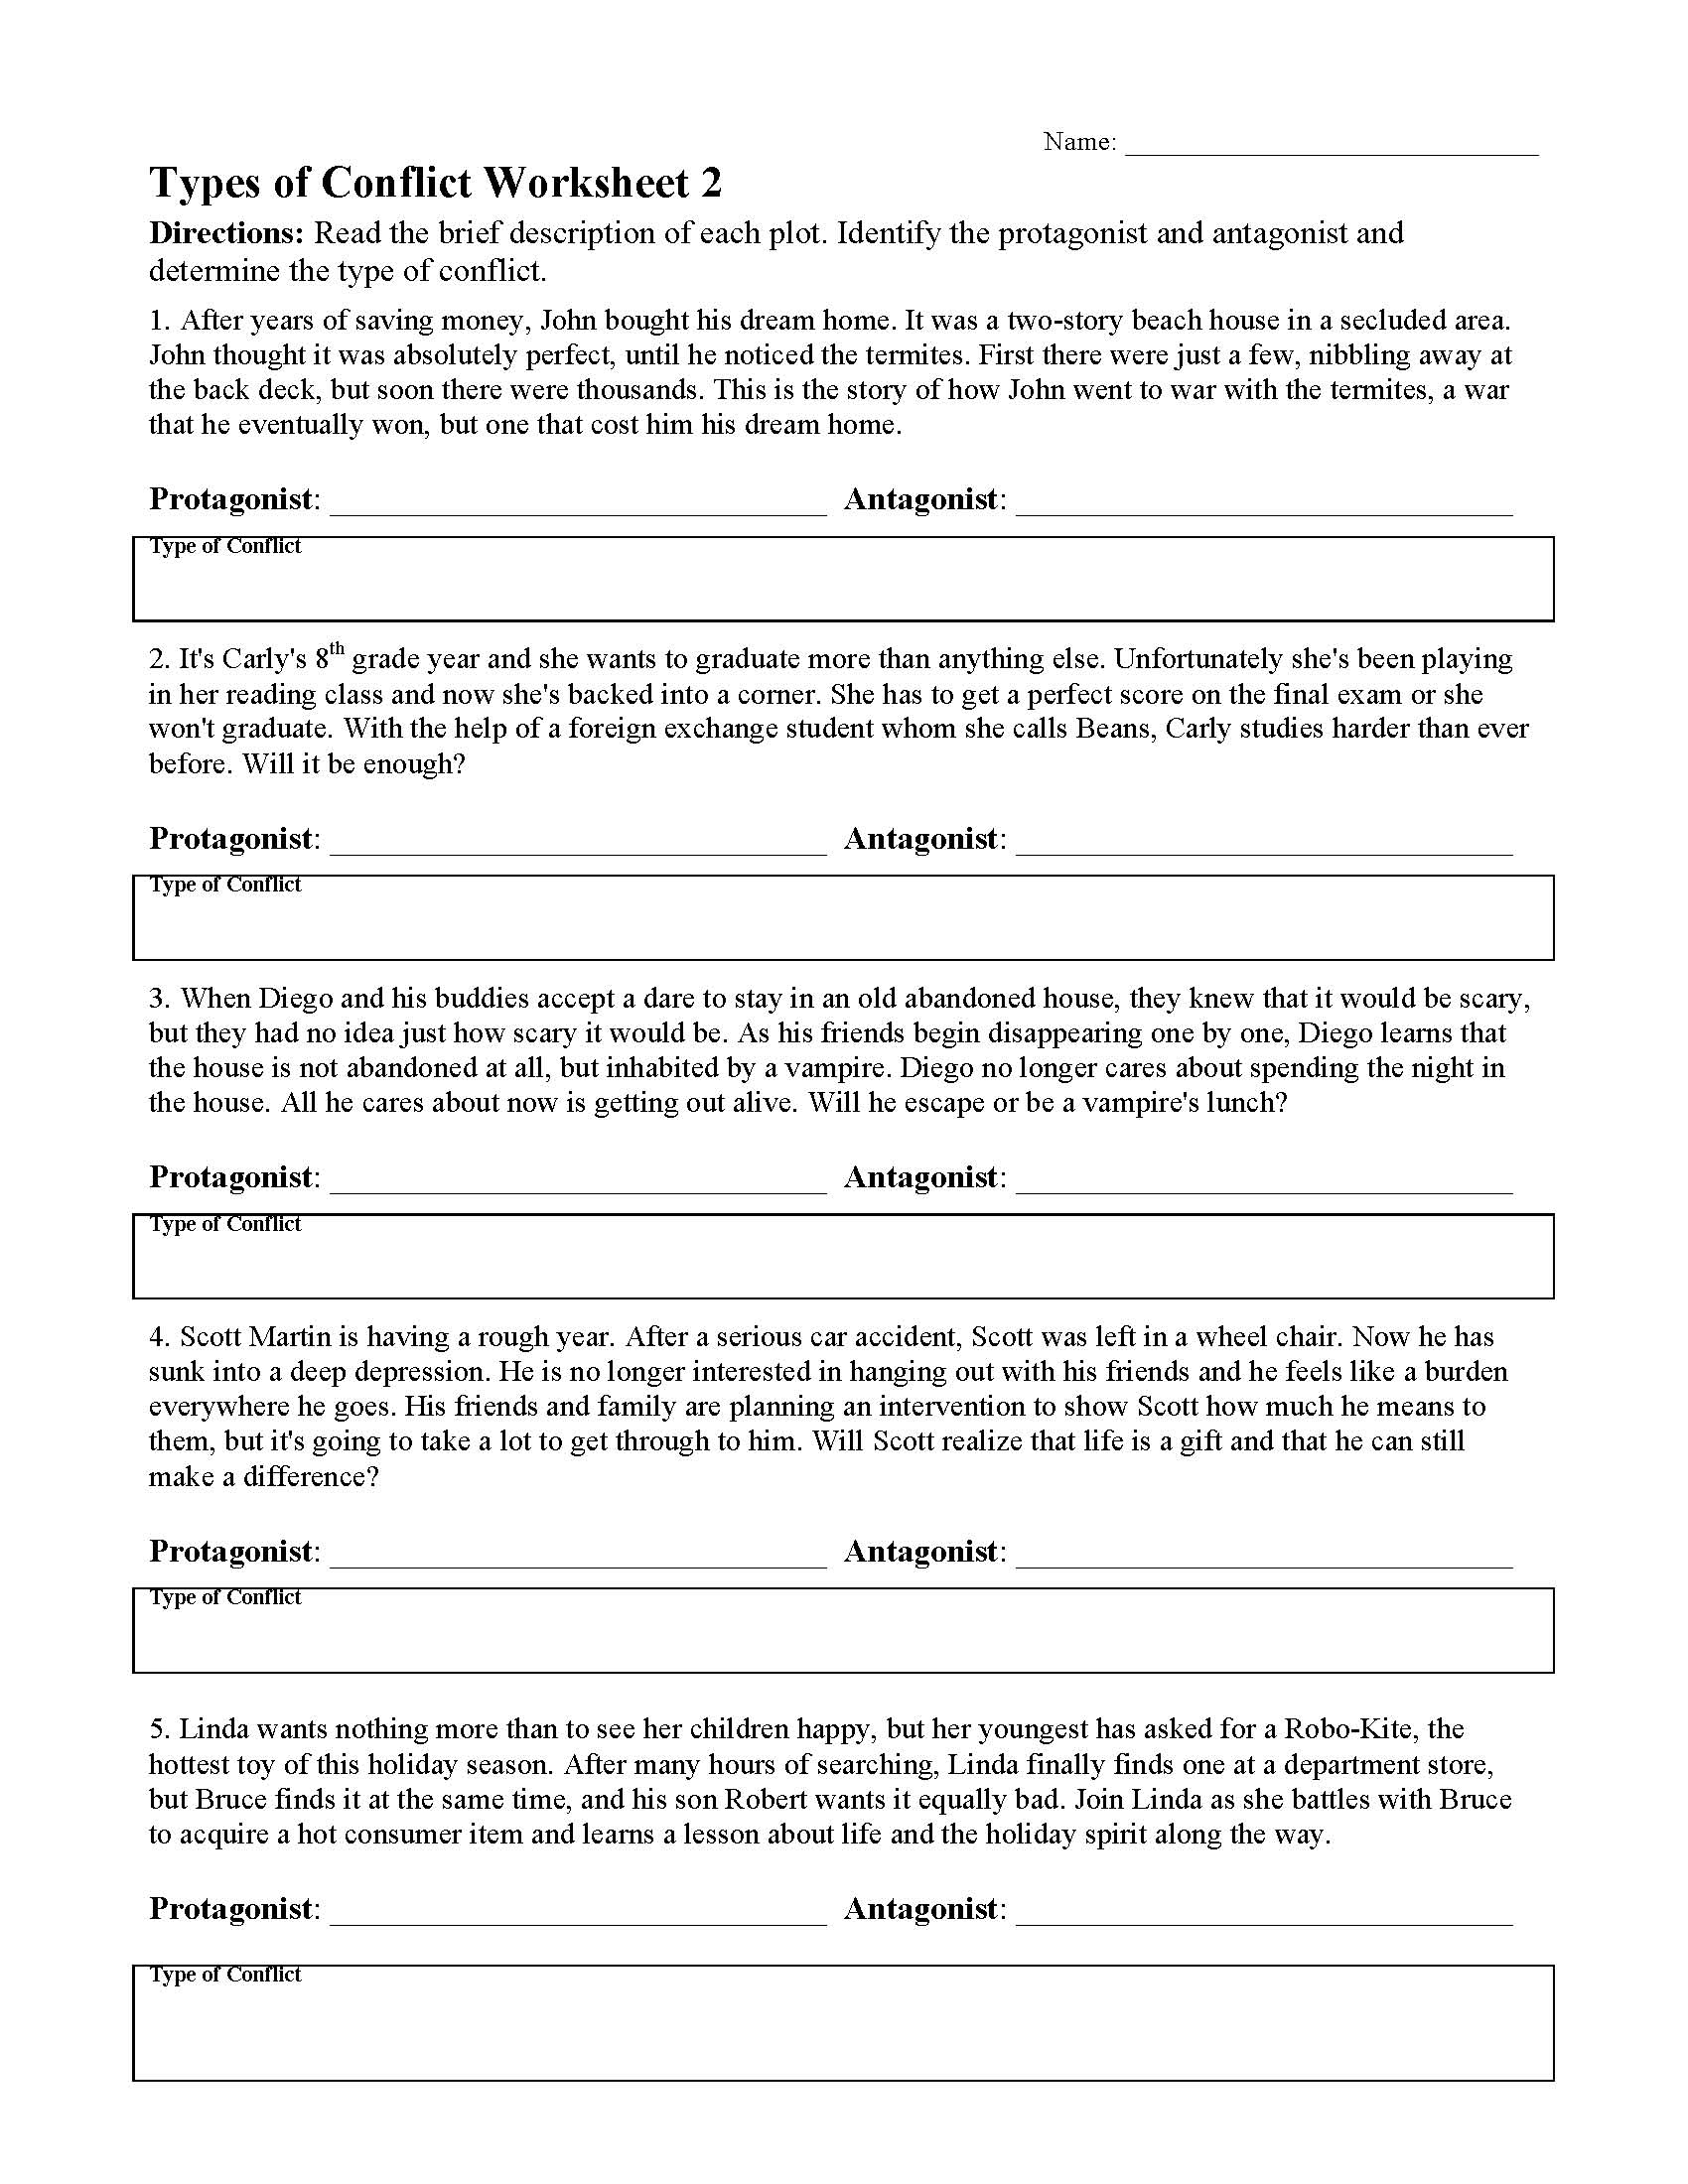 Types of Conflict Worksheet 2 | Preview